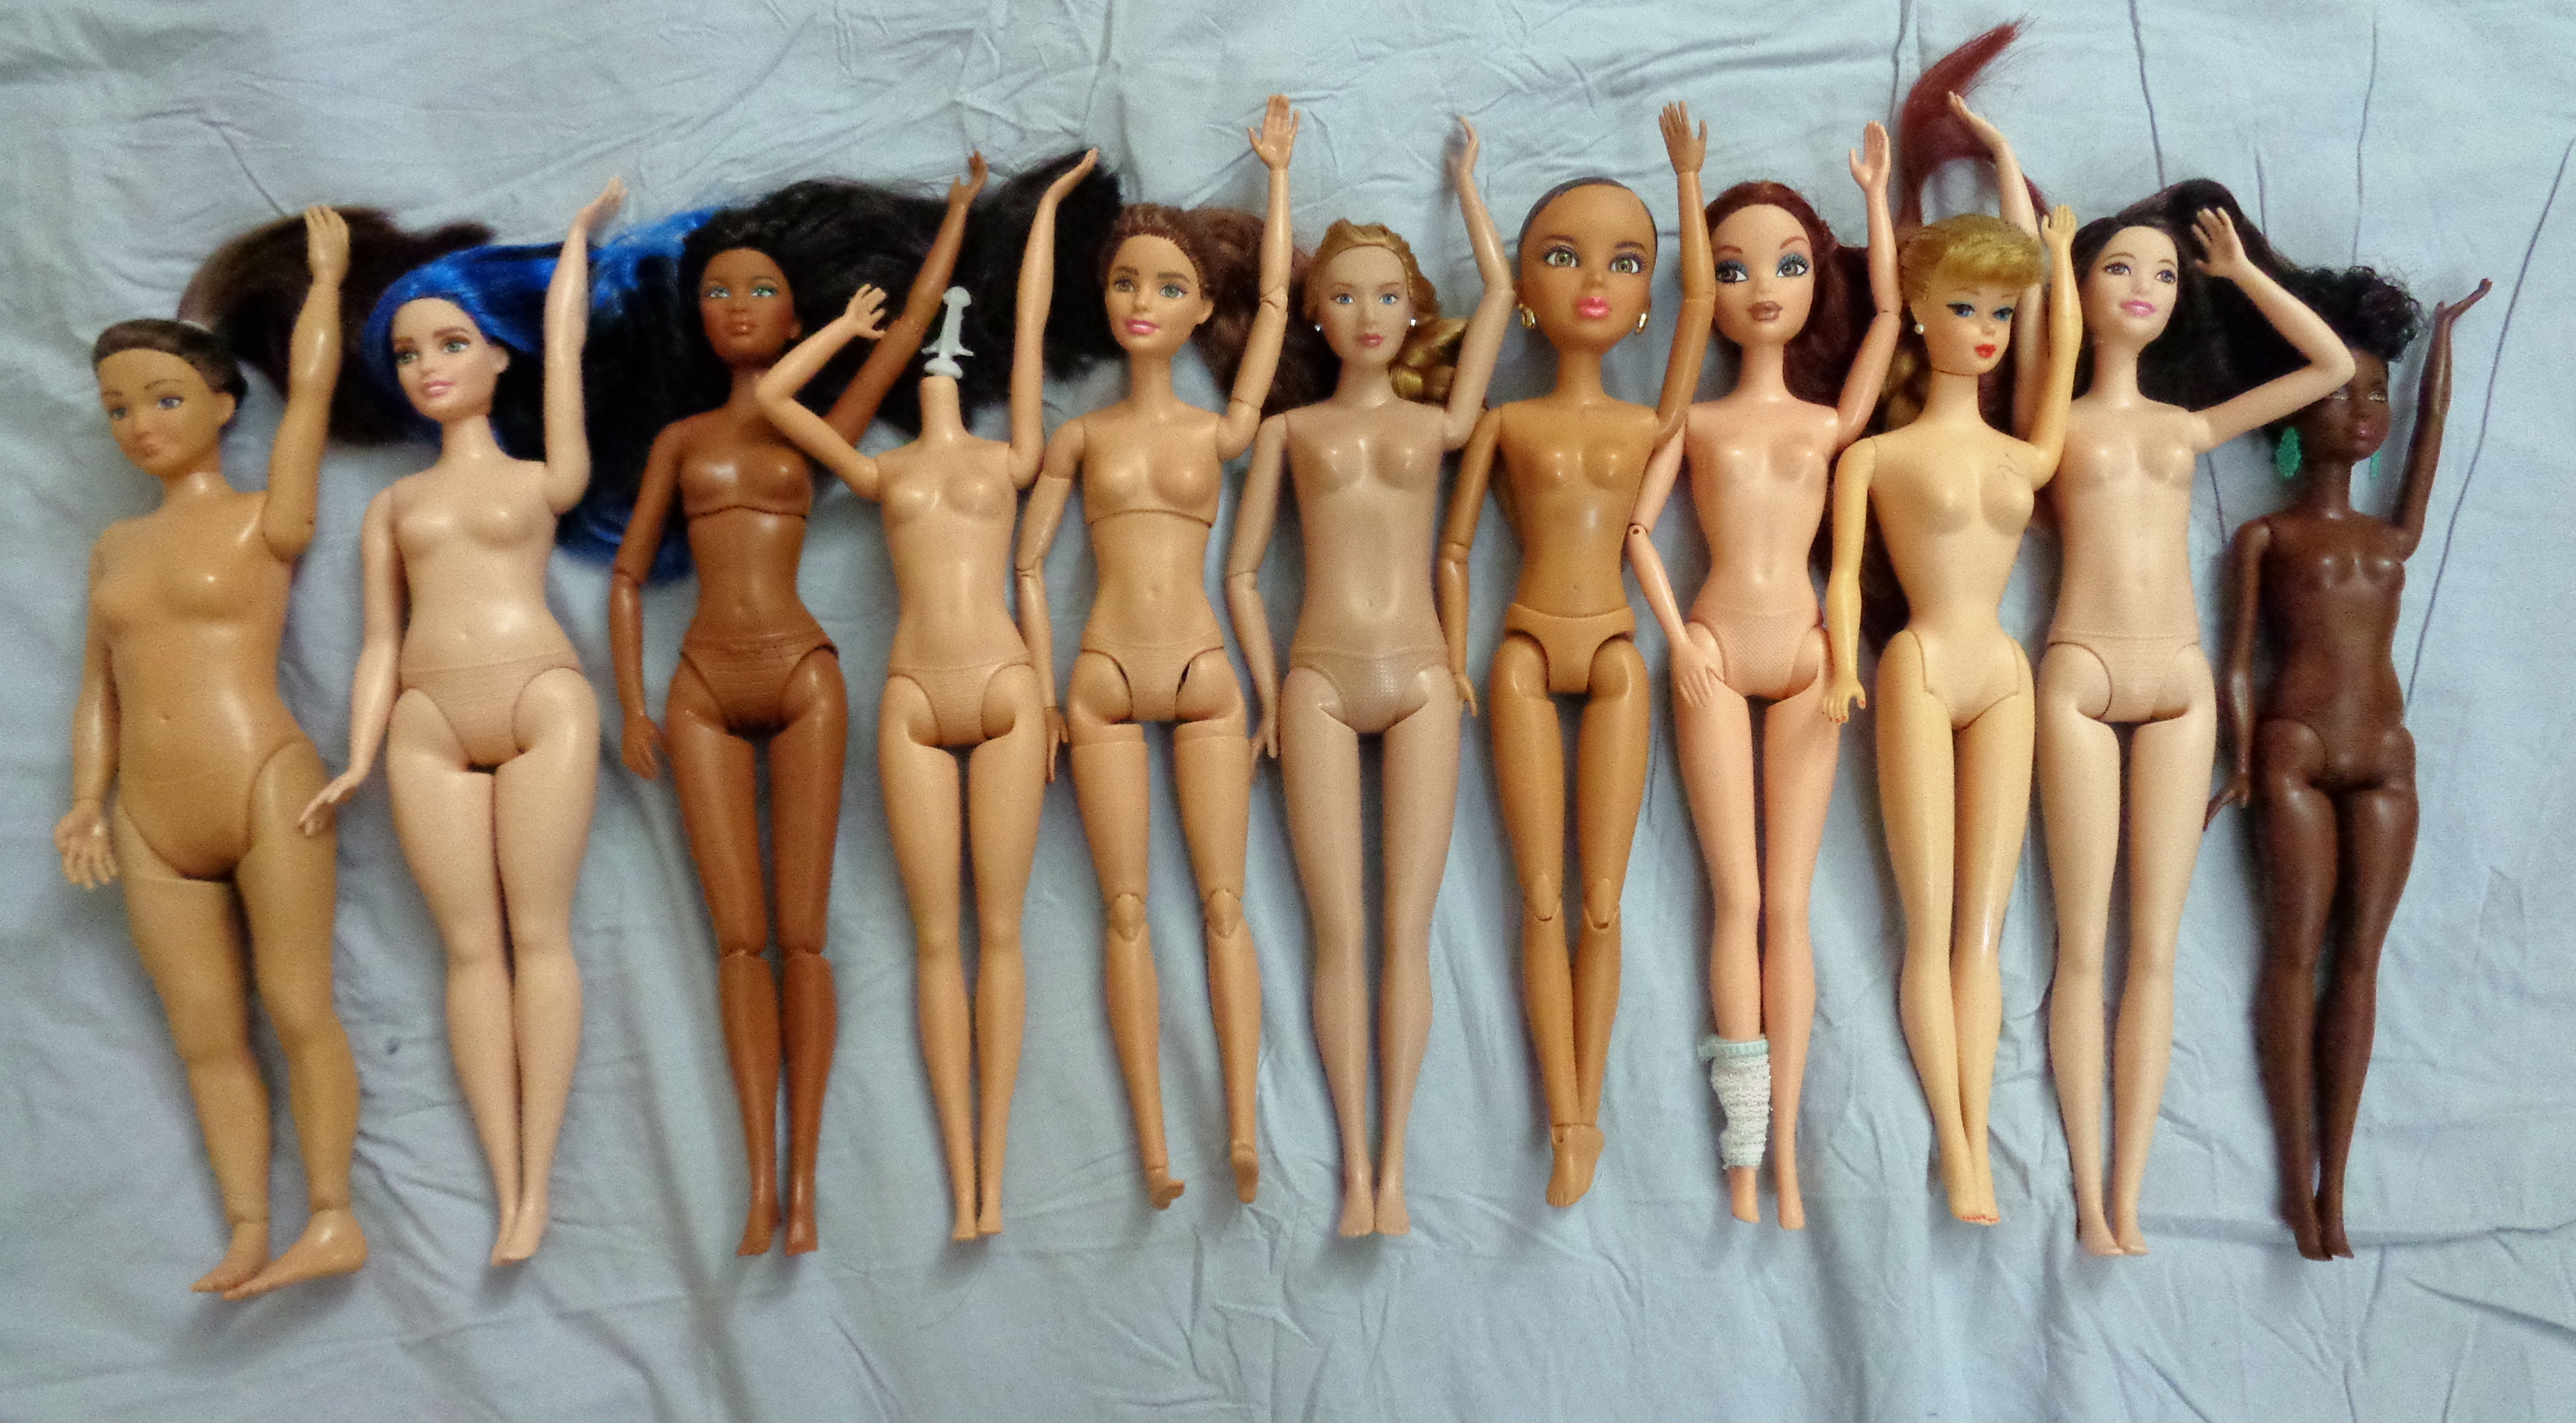 WARNING: The following contains photos of naked dolls. 